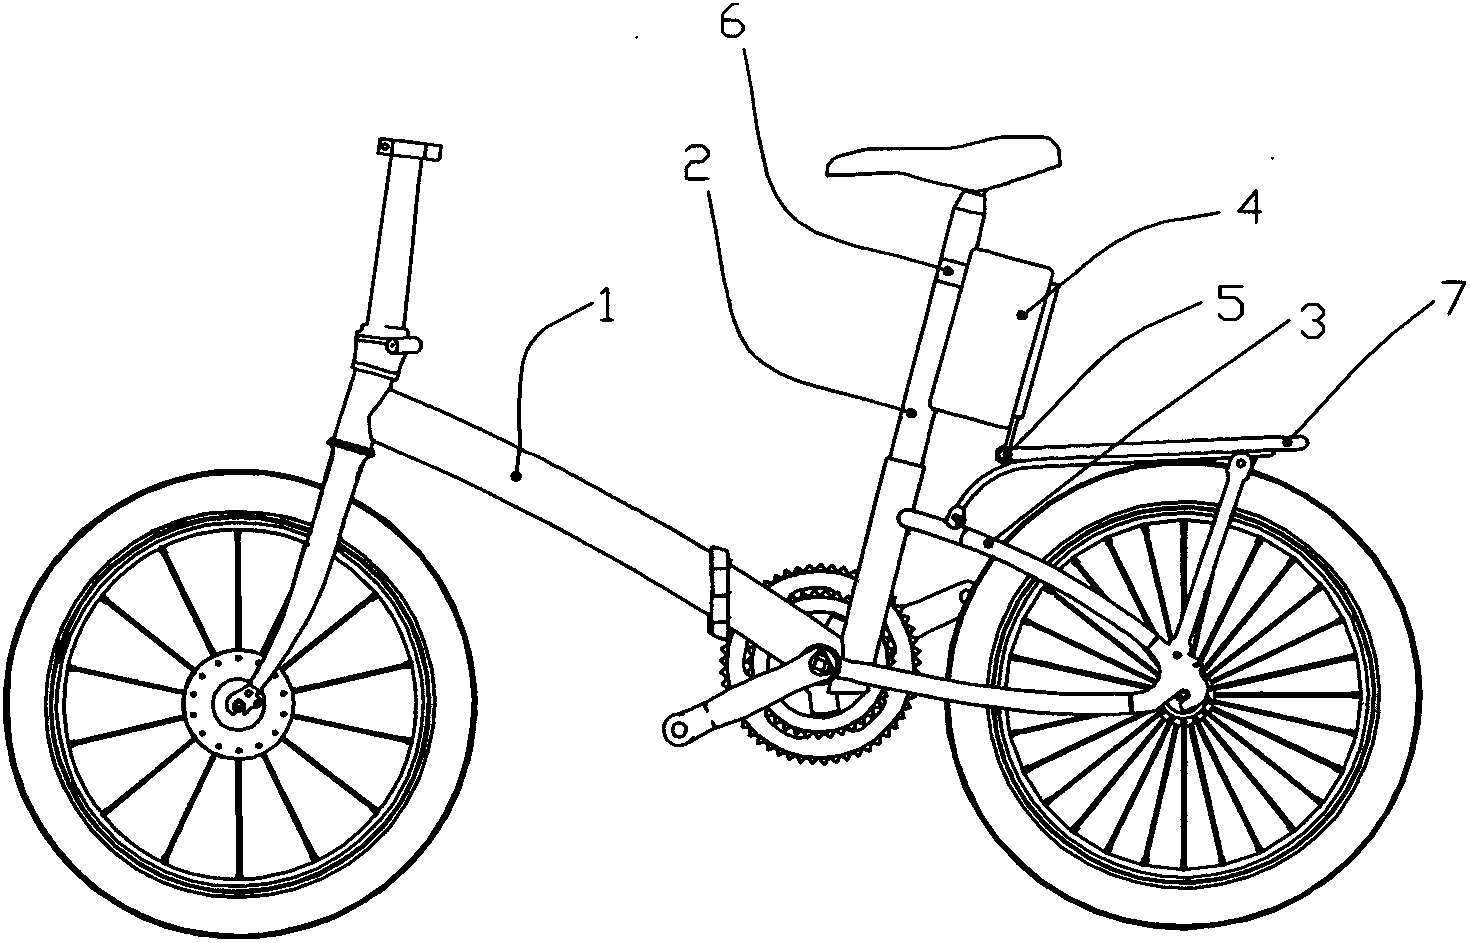 Battery mounting structure of electric vehicle